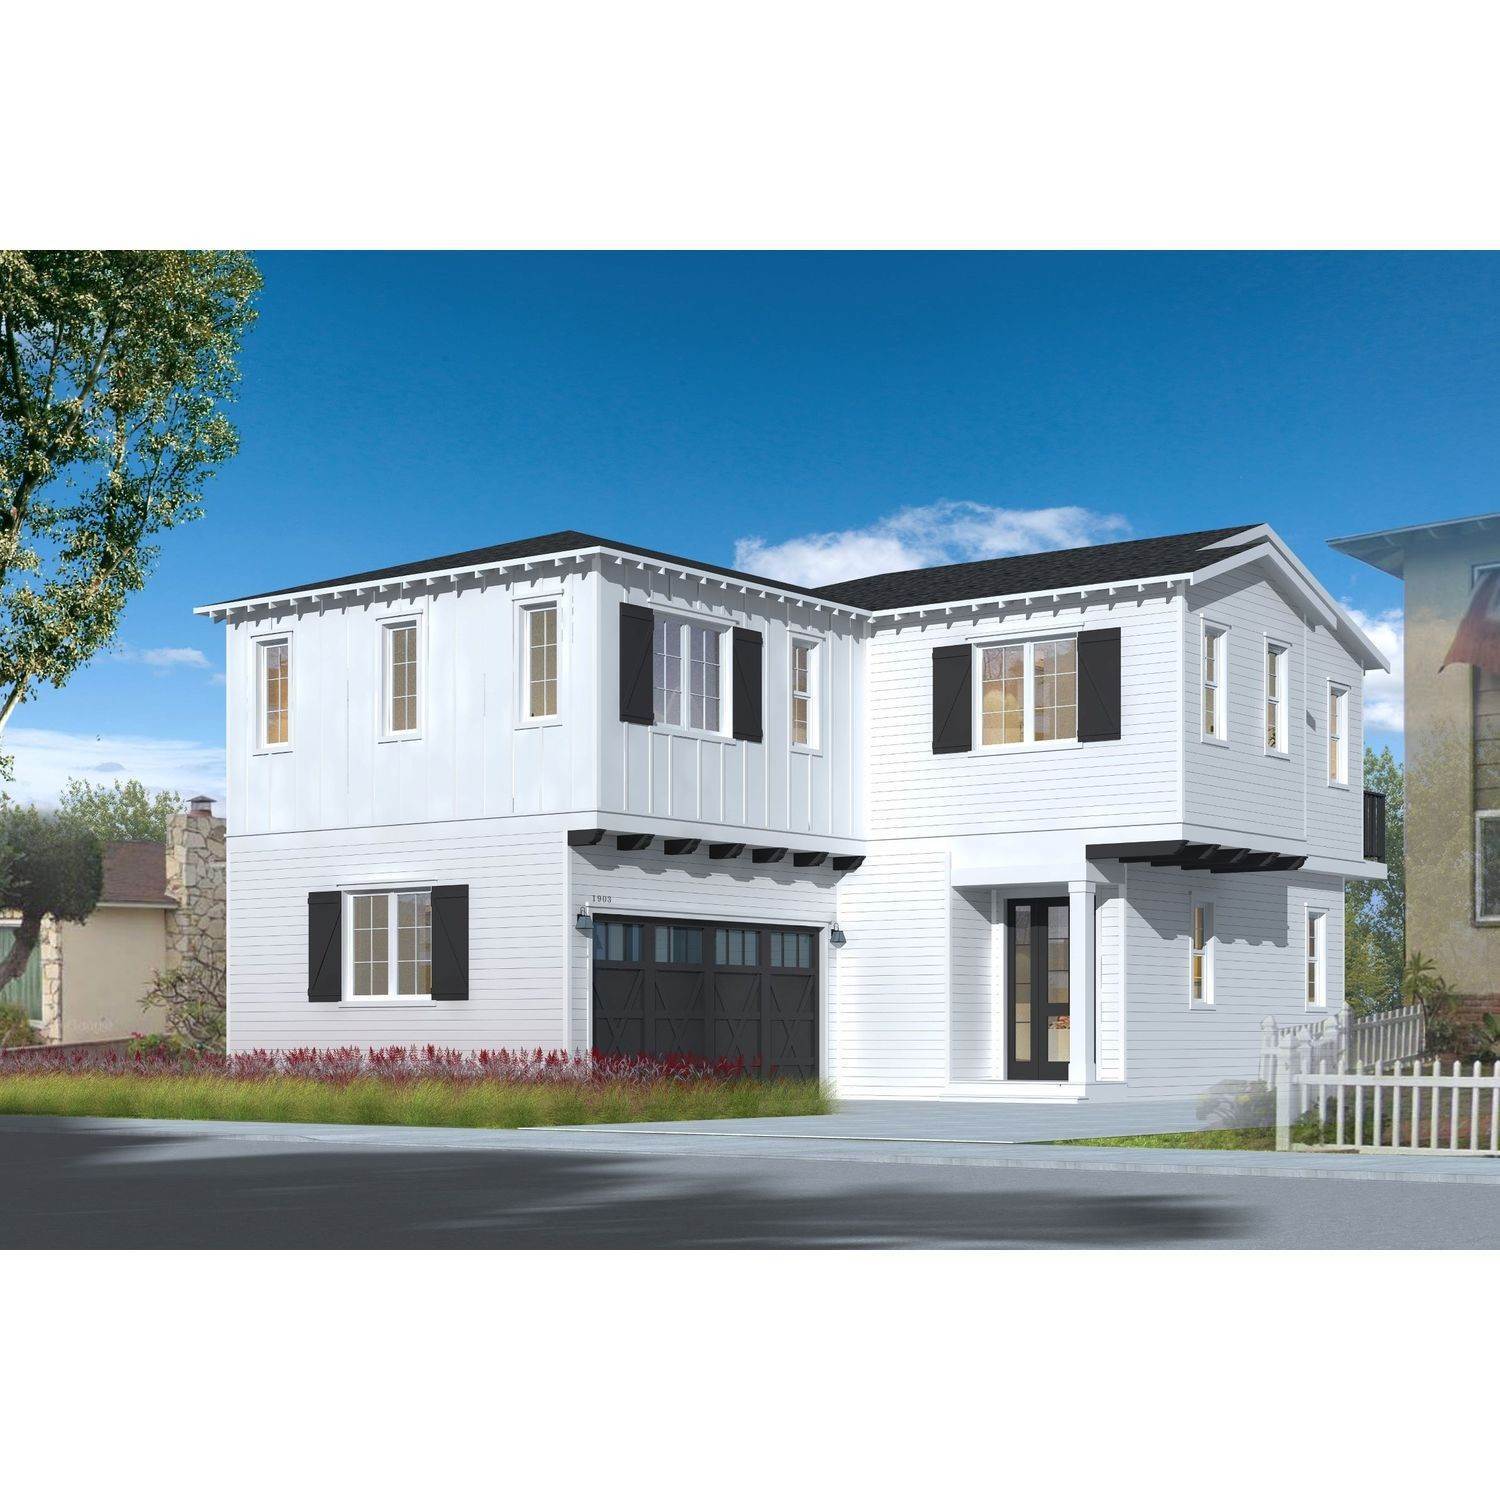 Multi Family for Sale at Socal- Build On Your Homesite - The Maple Collection CULVER CITY, CALIFORNIA 90232 UNITED STATES